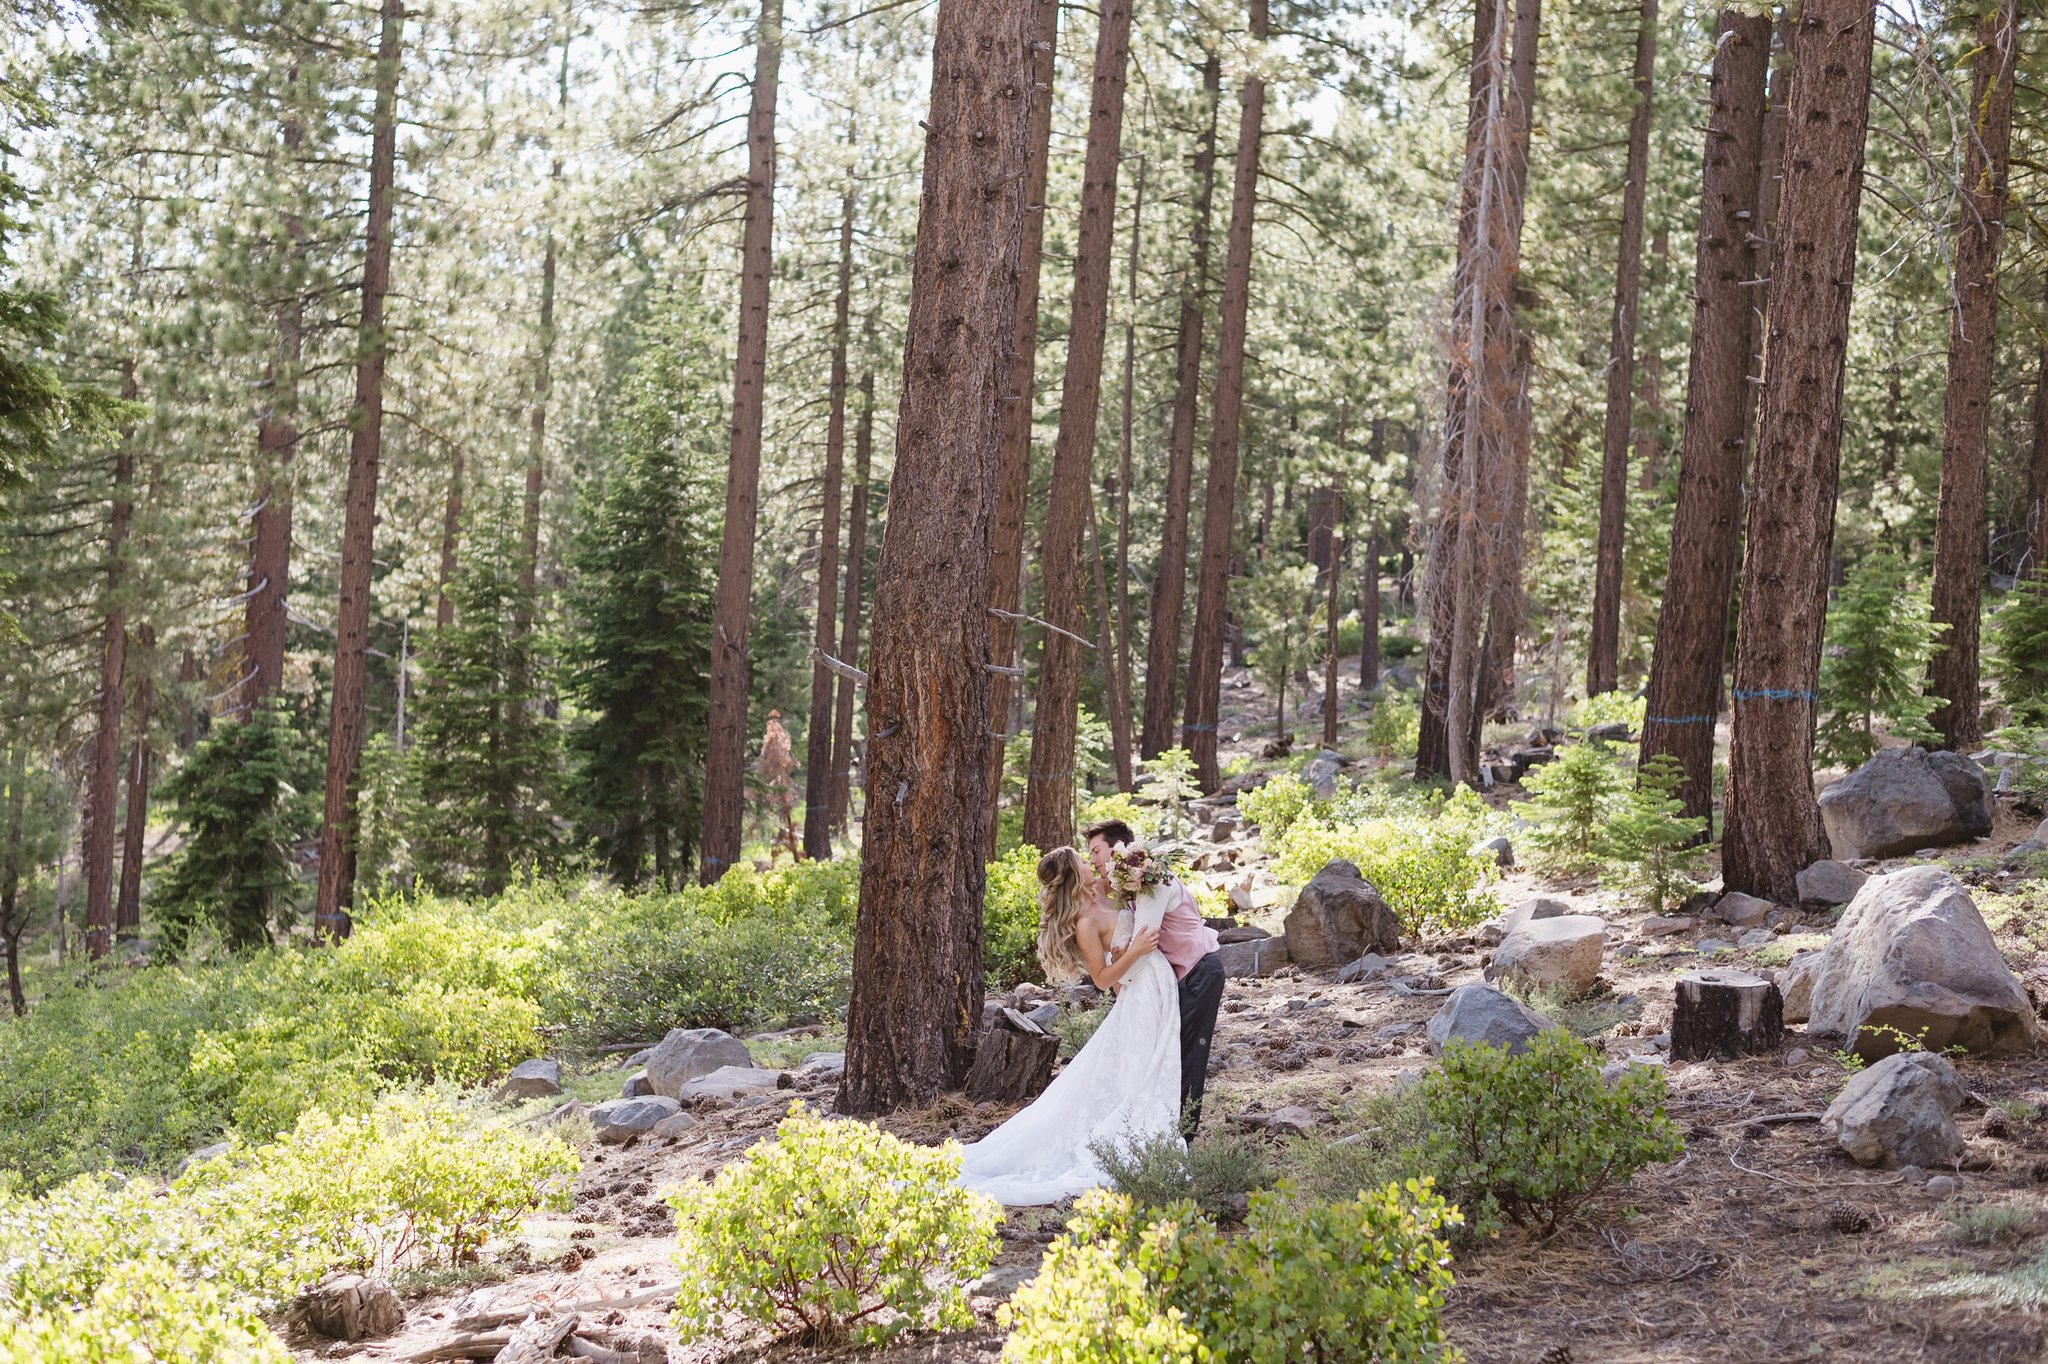 Jen Vazquez Photography. California Elopements in Yosemite, Lake Tahoe, and the Beaches or Coastlines of California